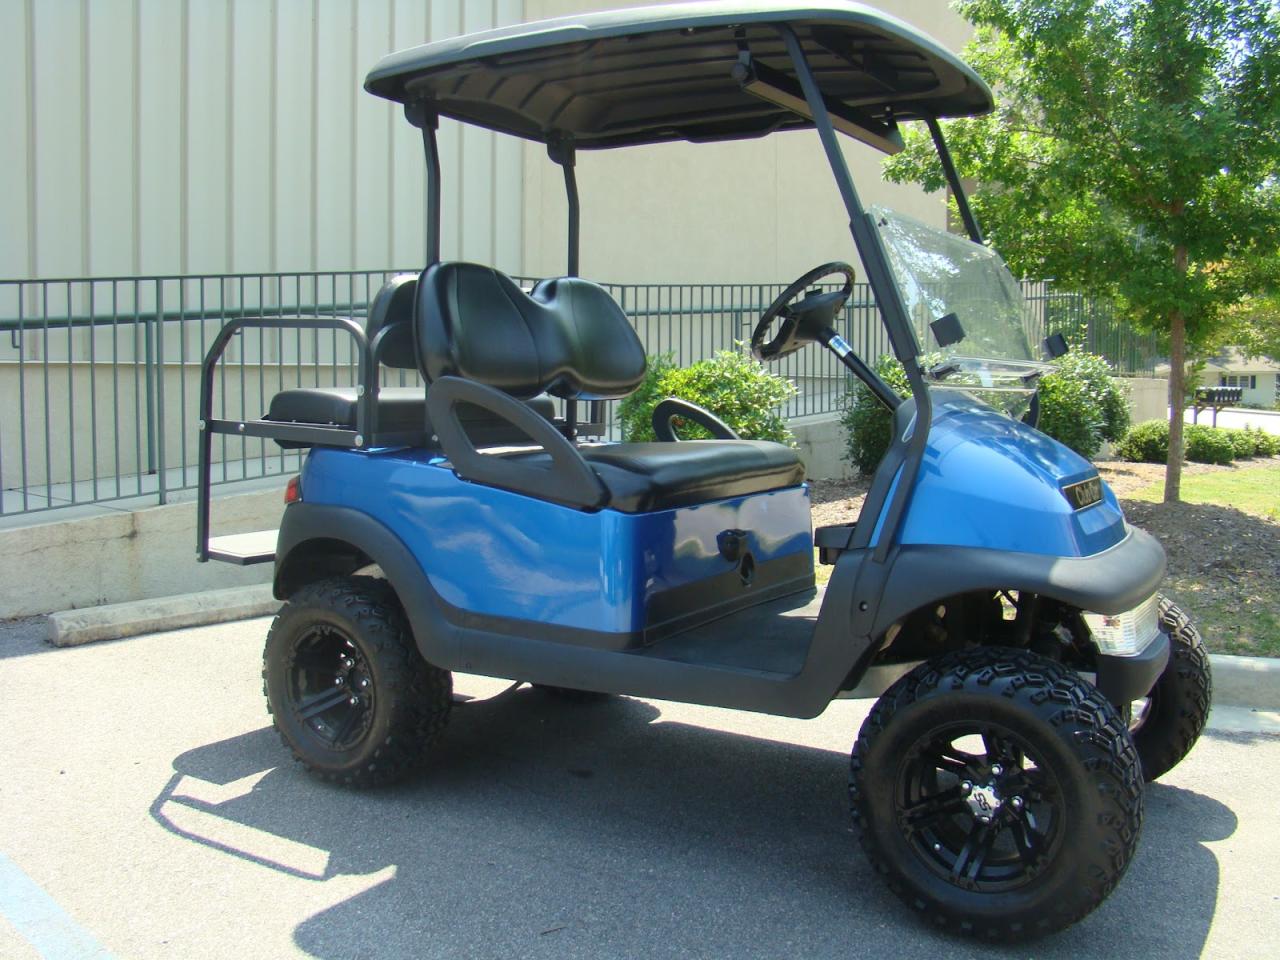 Find Your Dream Golf Cart: Used Golf Carts for Sale by Owner in Colquitt, Georgia